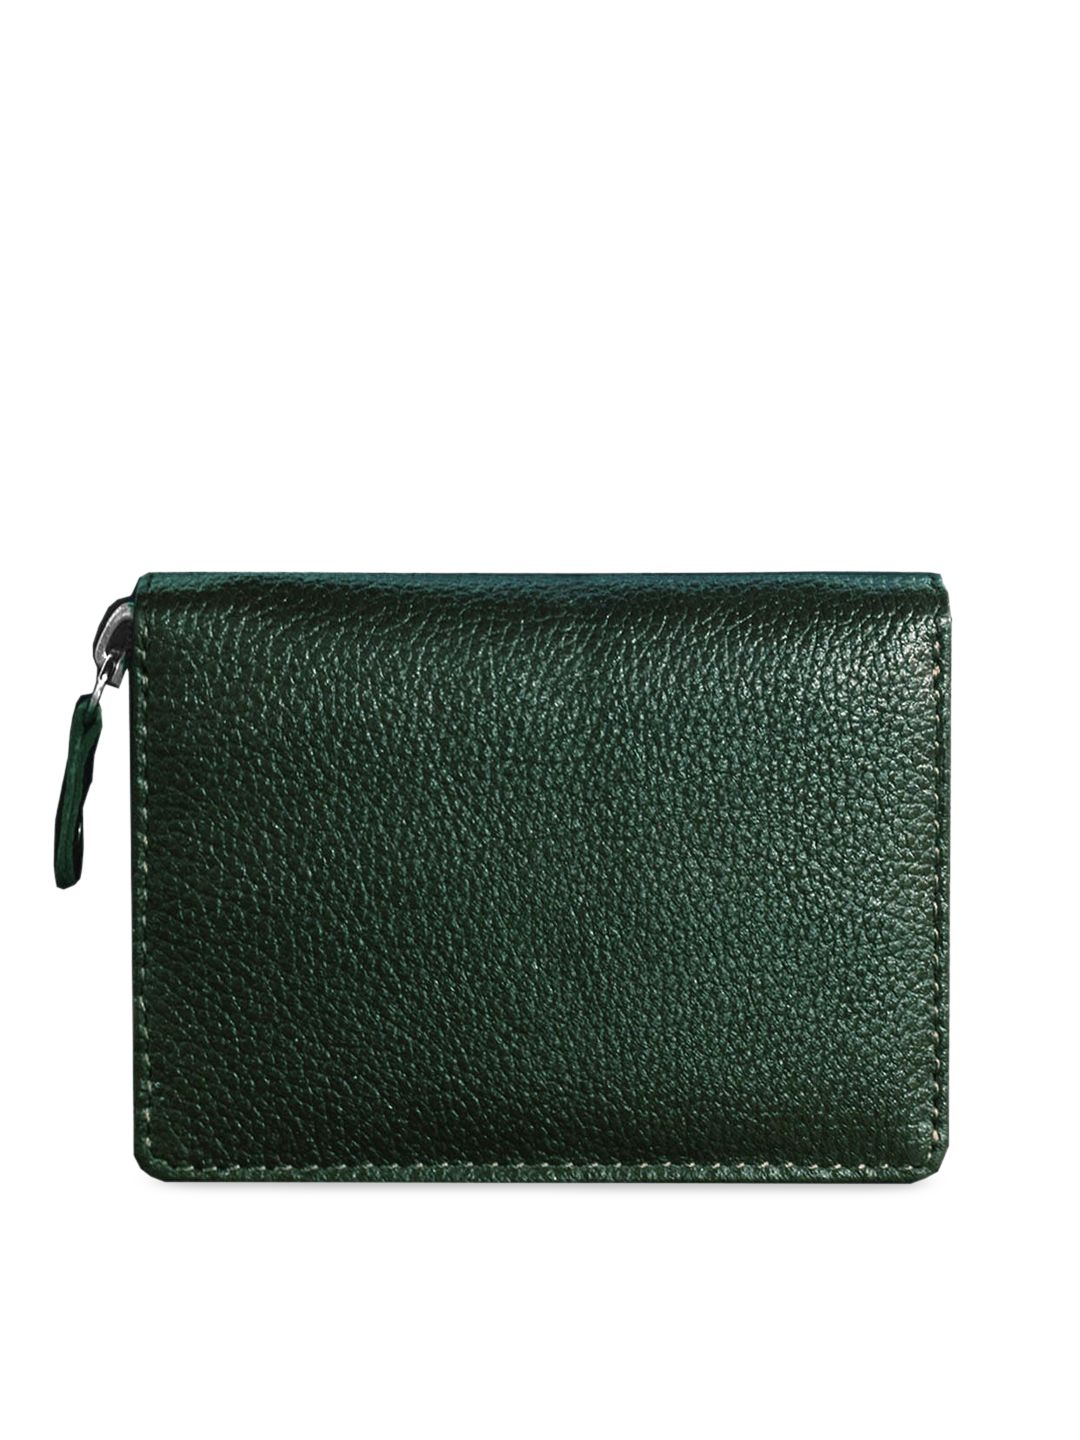 ABYS Unisex Green Textured Zip Around Leather Wallet Price in India